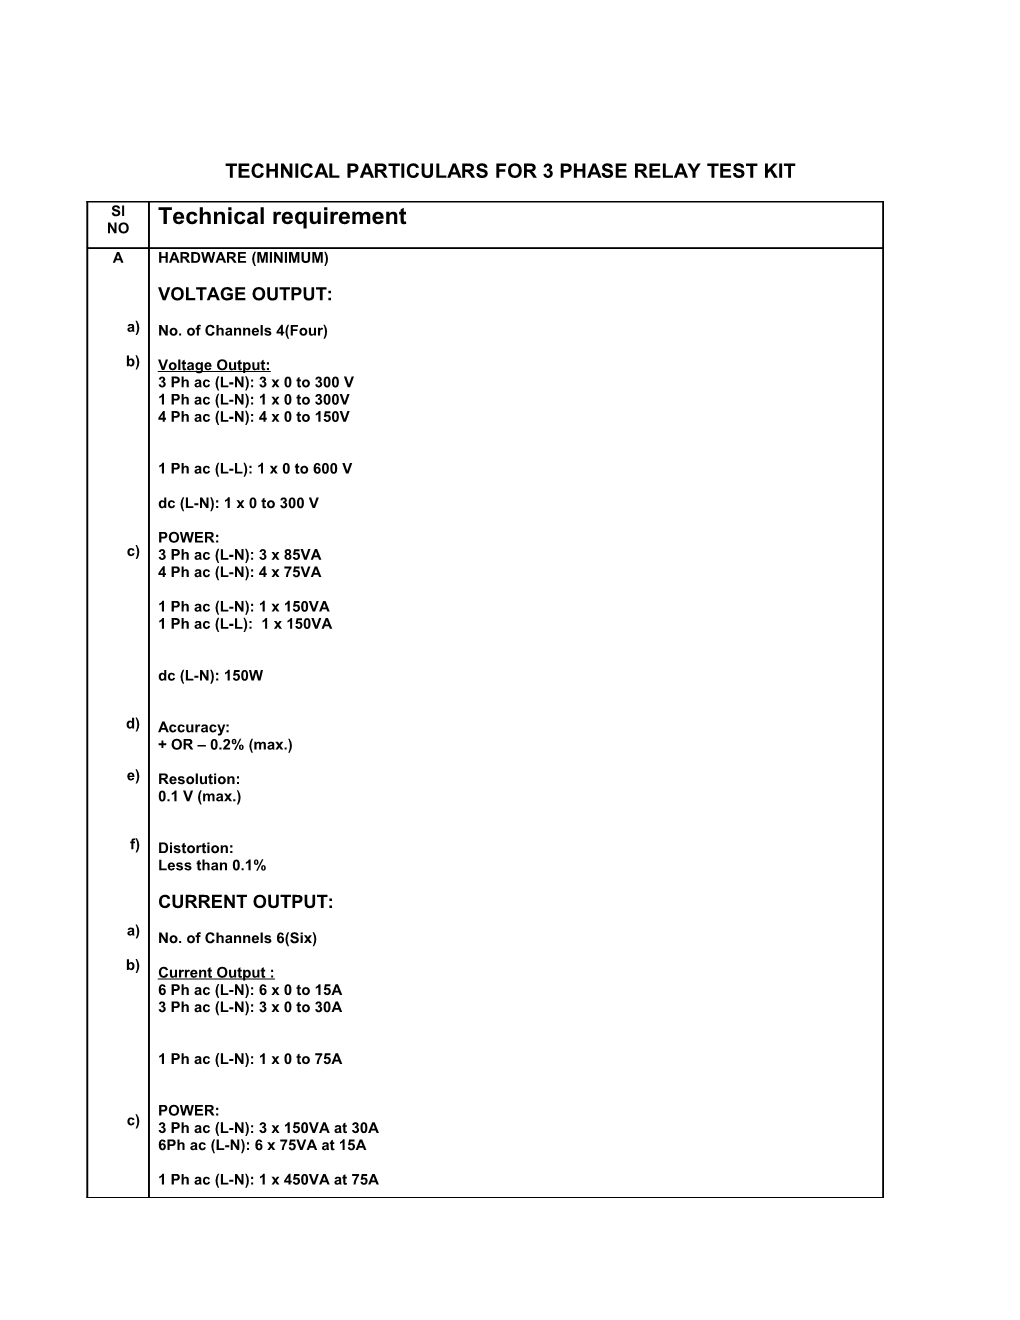 Technical Particulars for 3 Phase Relay Test Kit